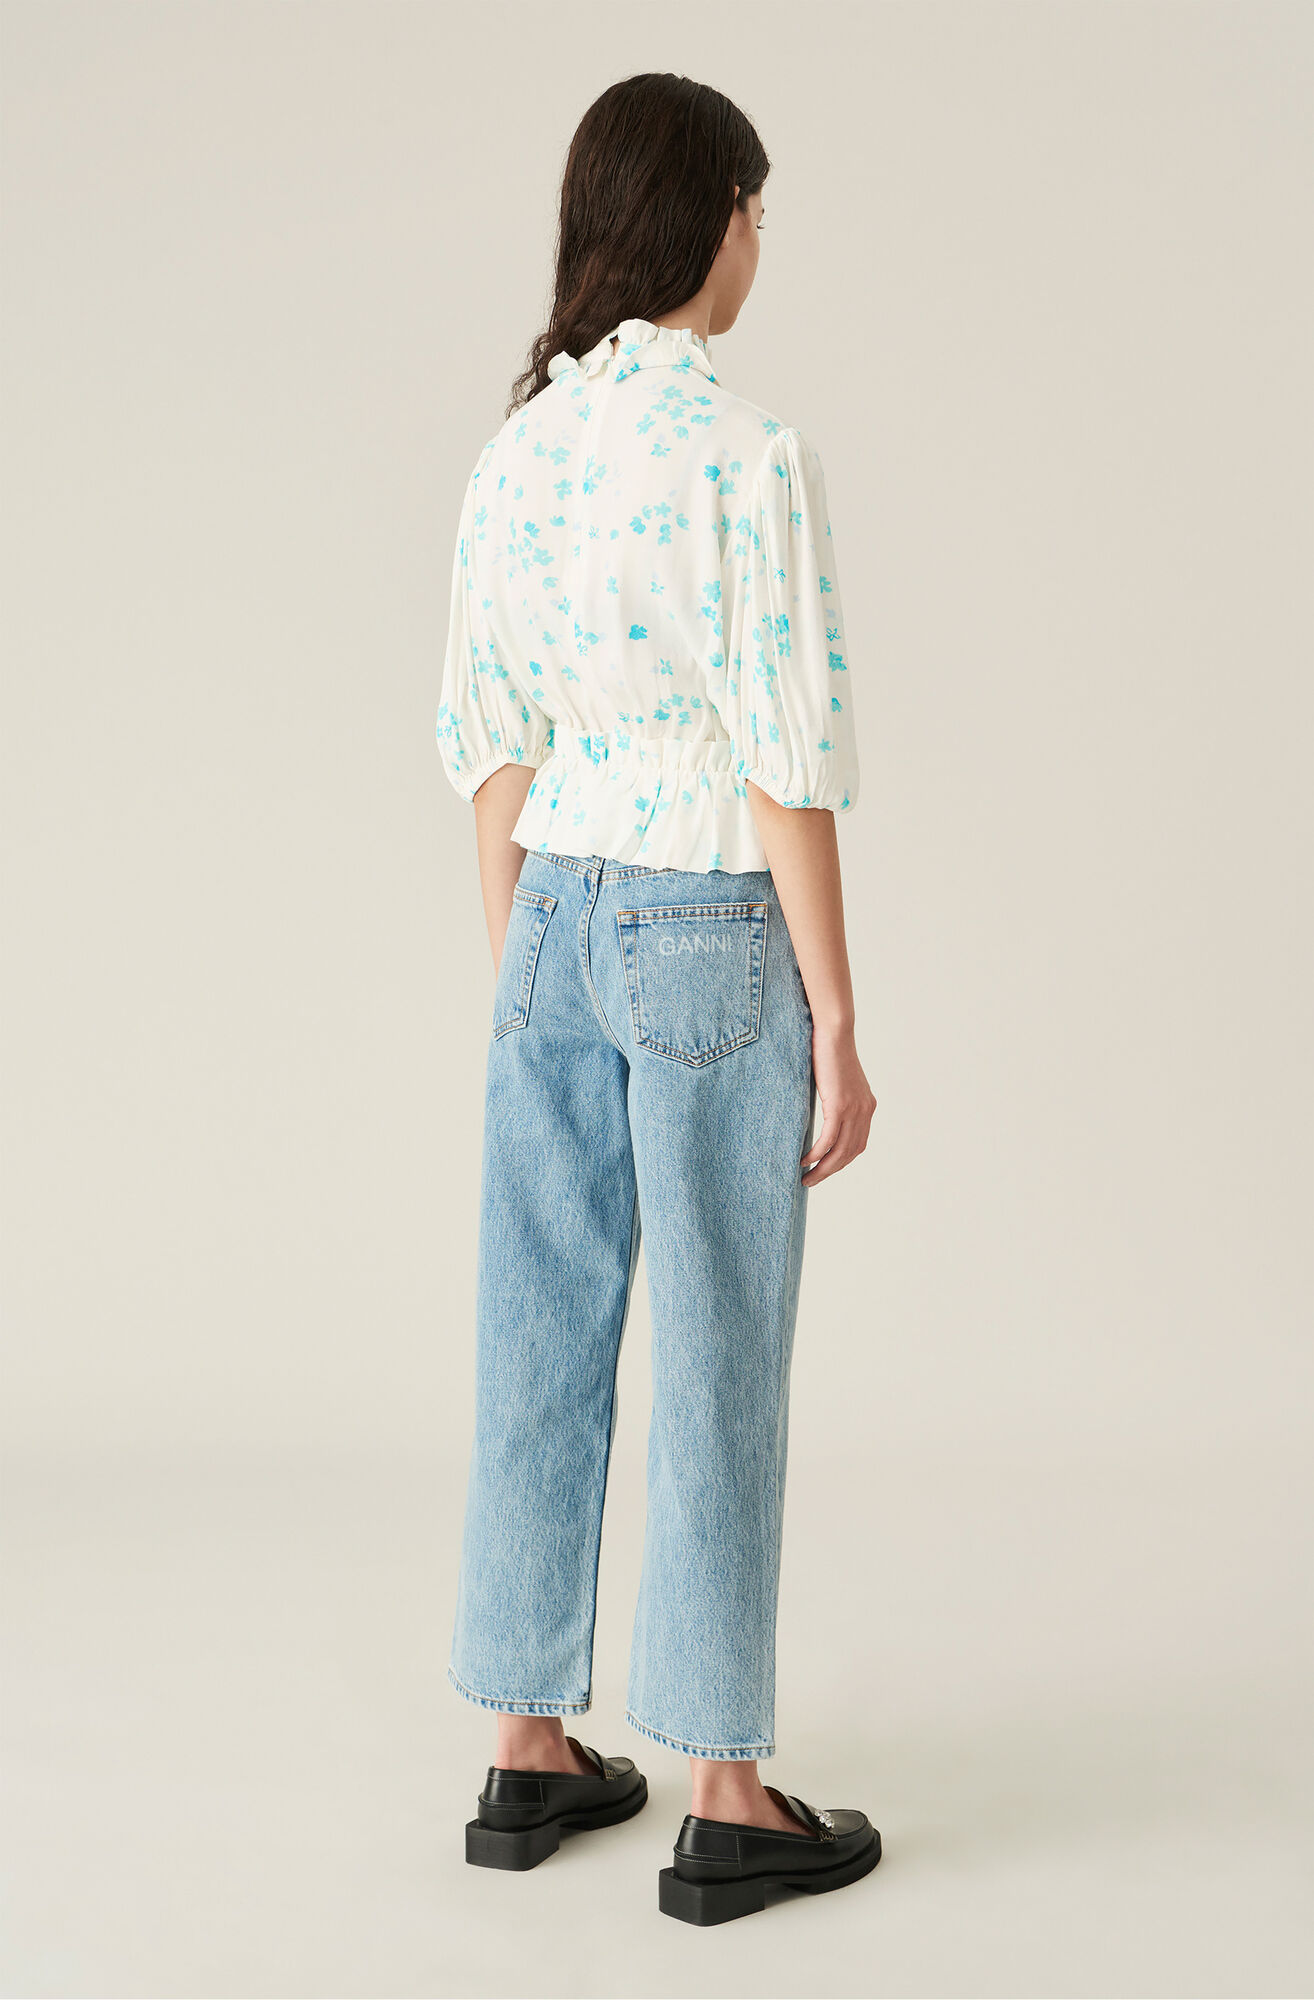 Classic Denim High-waisted Cropped Jeans, Cotton, in colour Washed Indigo - 2 - GANNI